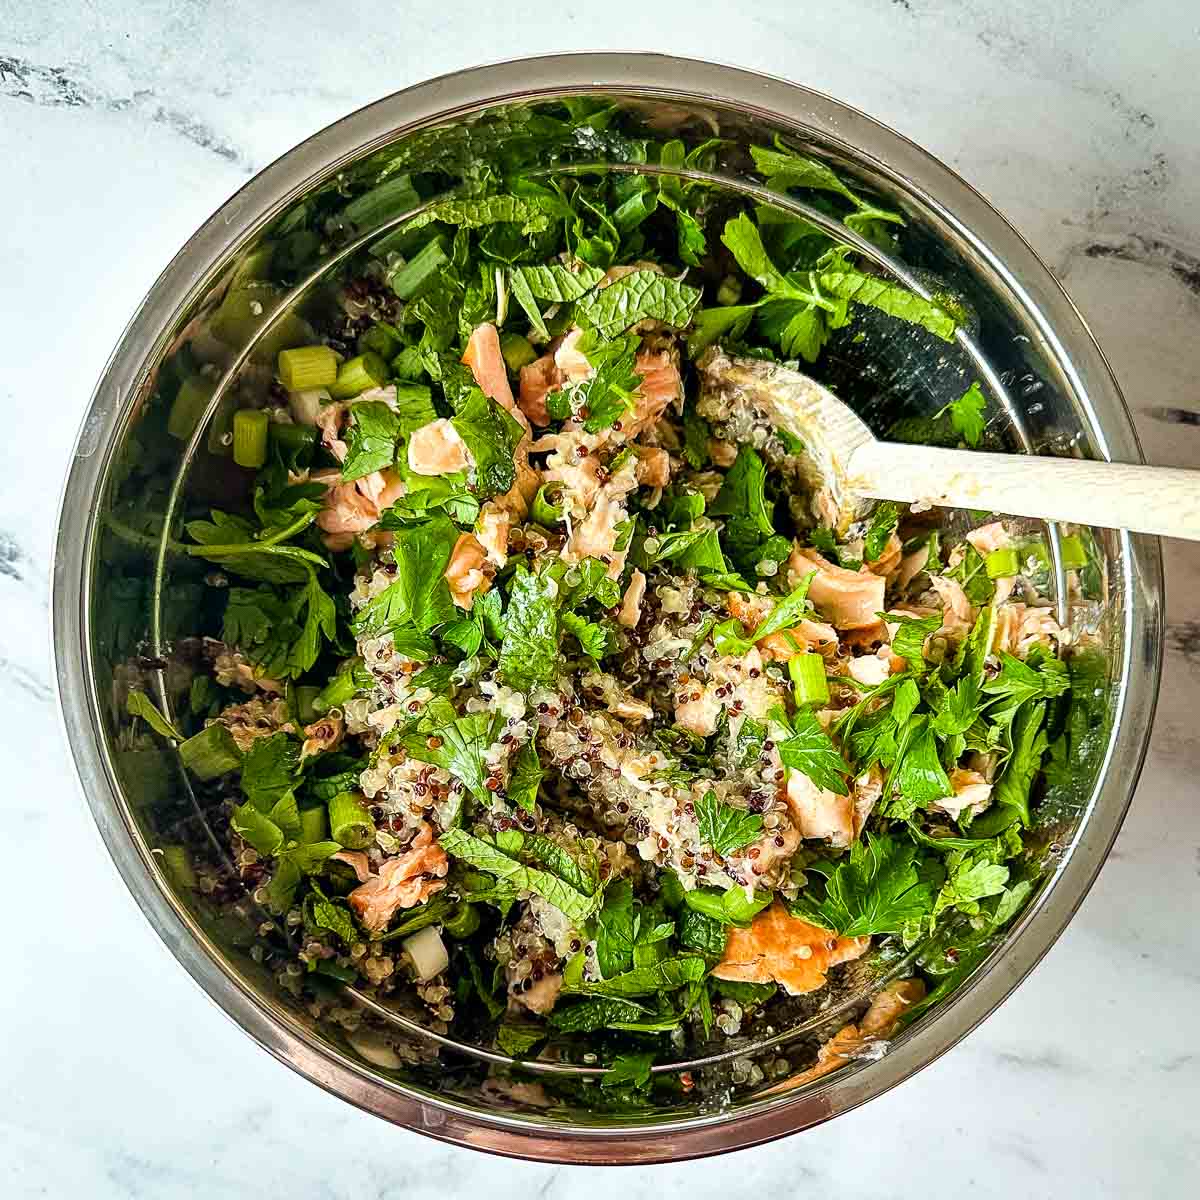 The ingredients for salmon quinoa salad are mixed together in a silver bowl.